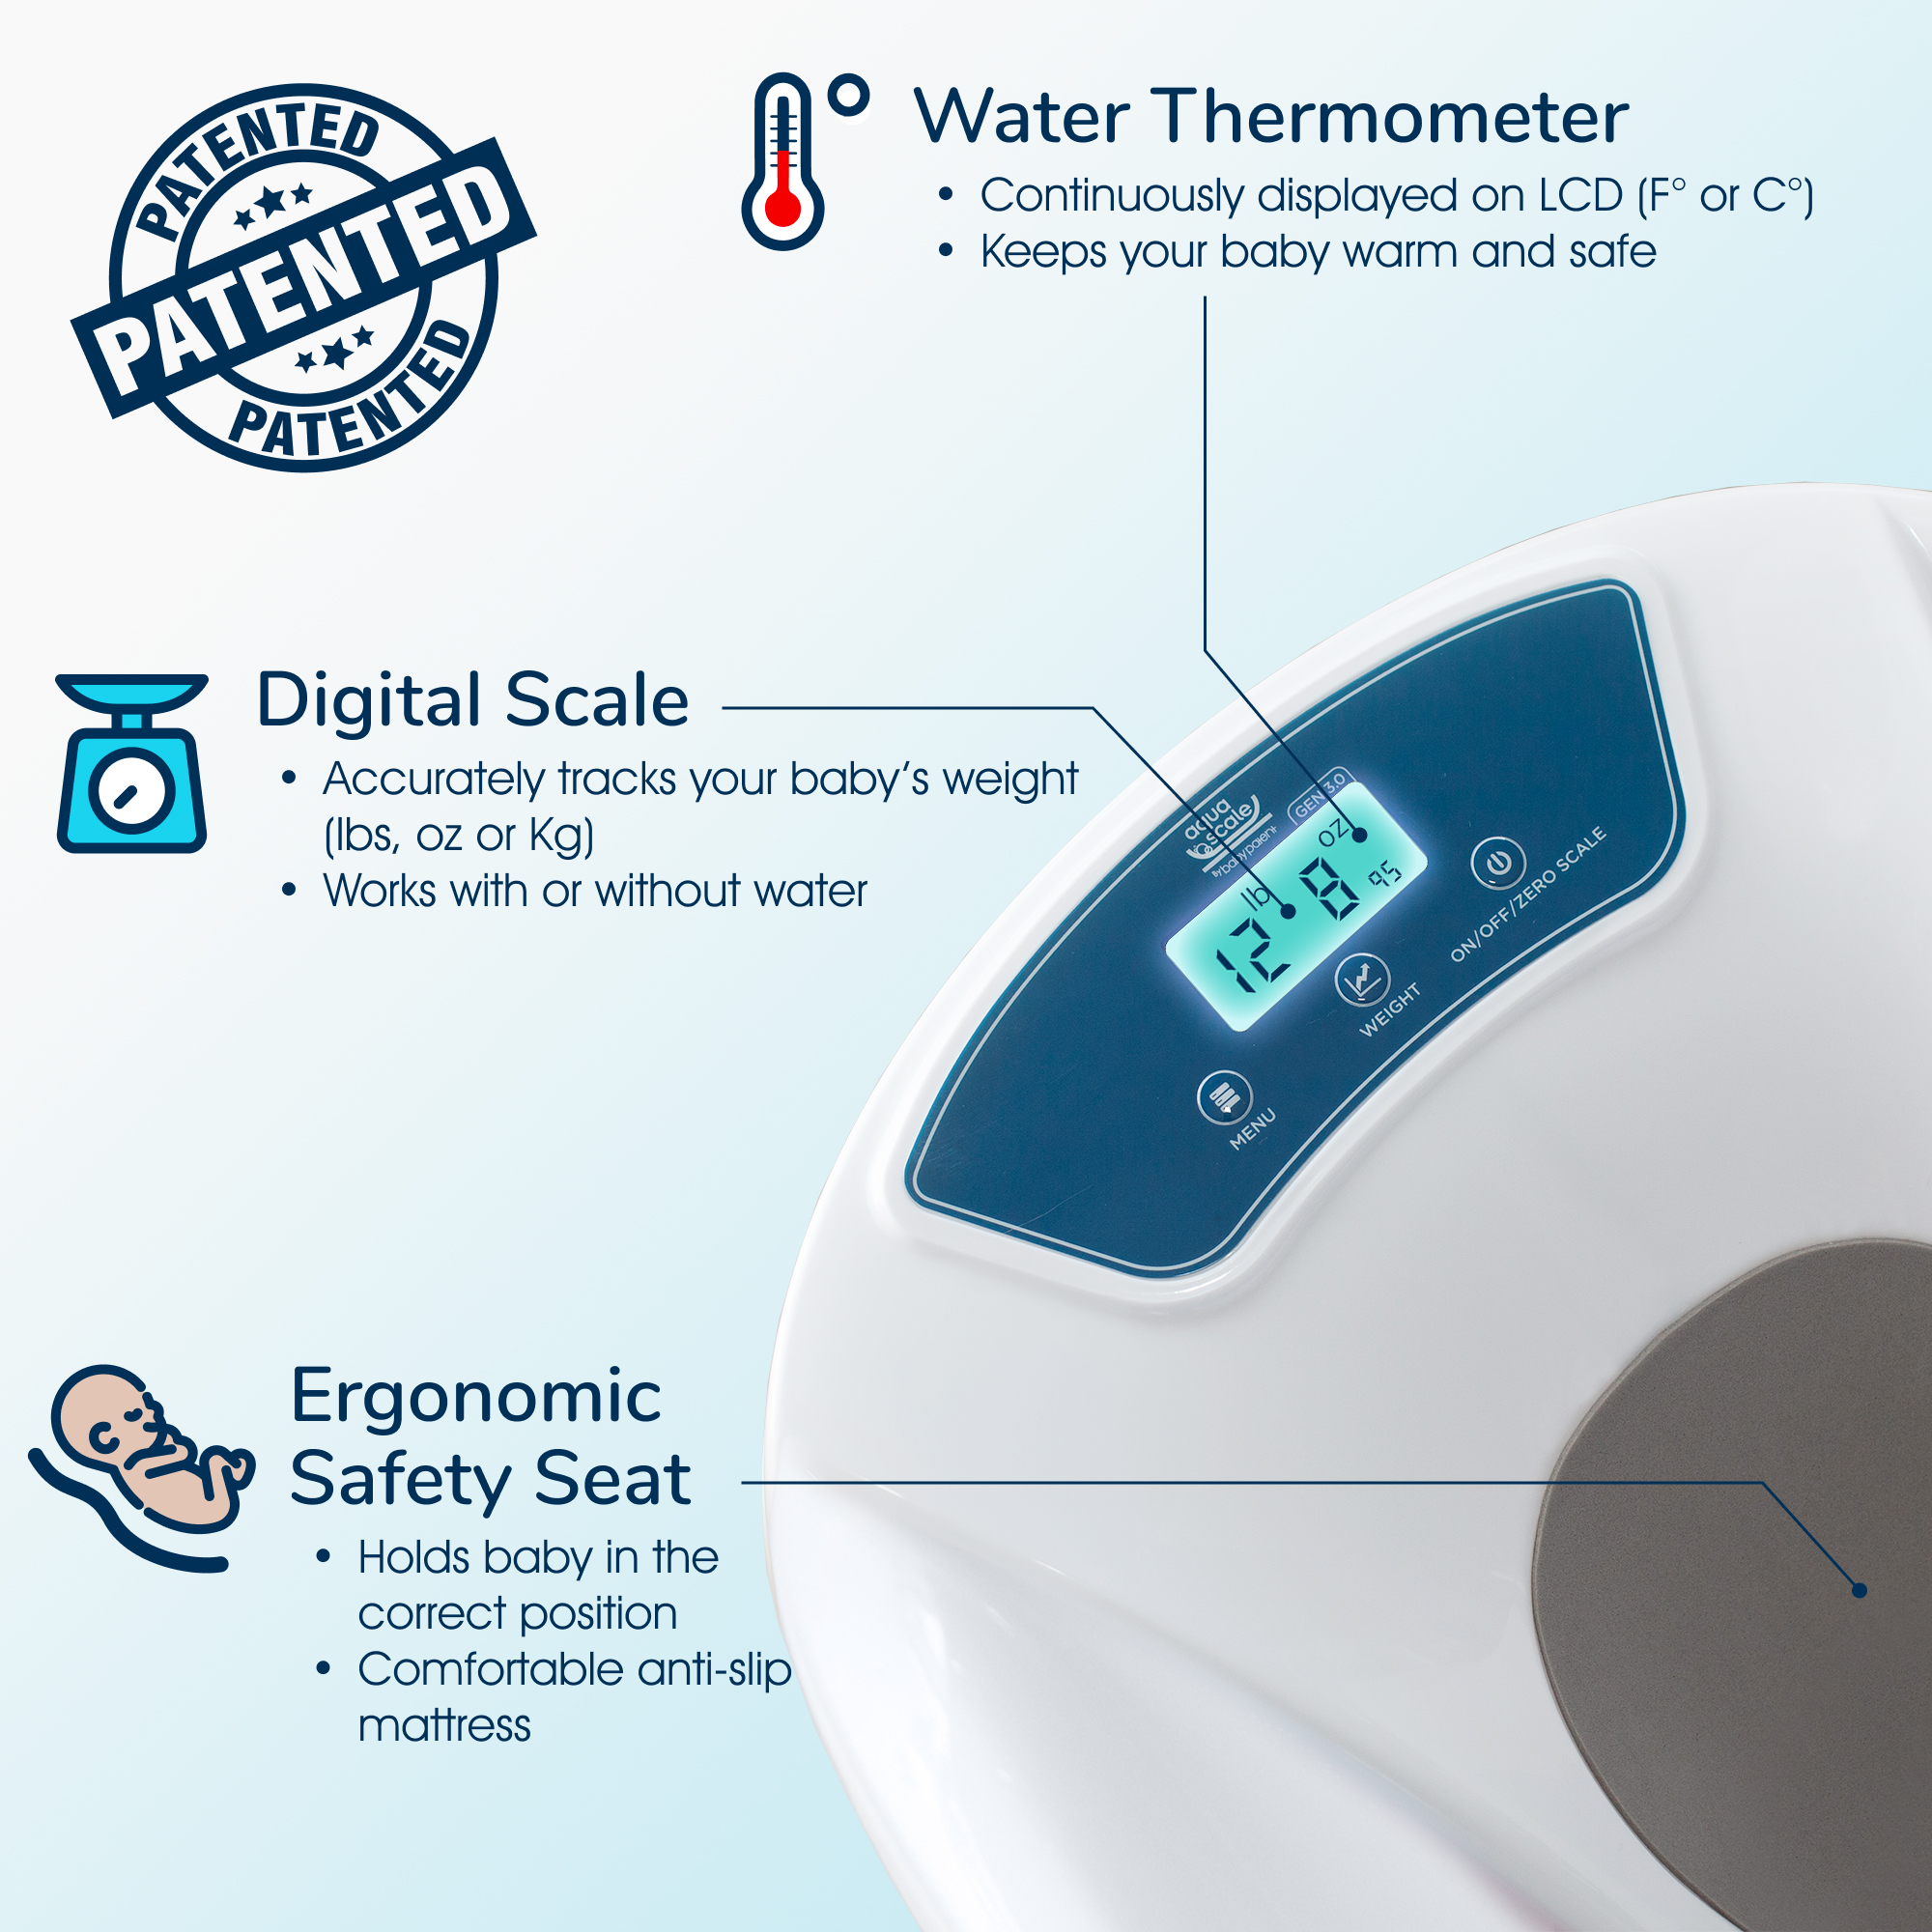 Baby Patent Aqua Scale 3-in-1 Digital Scale Water Thermometer and Infant Tub - image 2 of 7